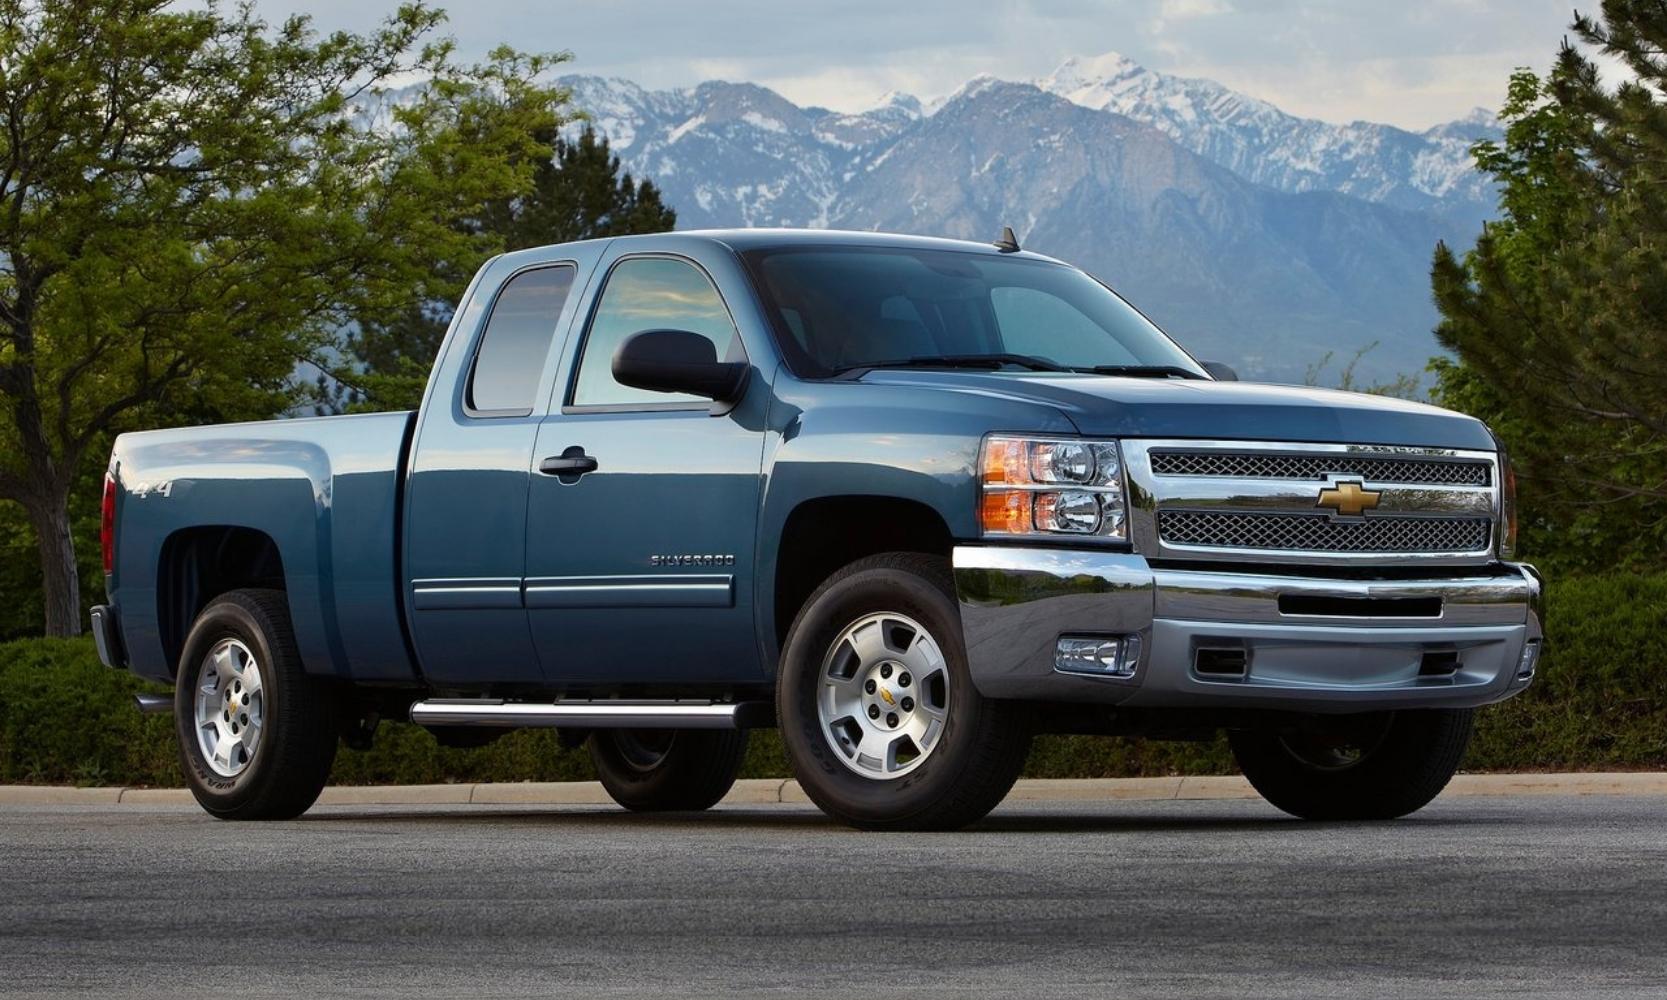 Used 2013 Chevy Silverado 1500 in steel blue exterior color with snowy mountains in the background